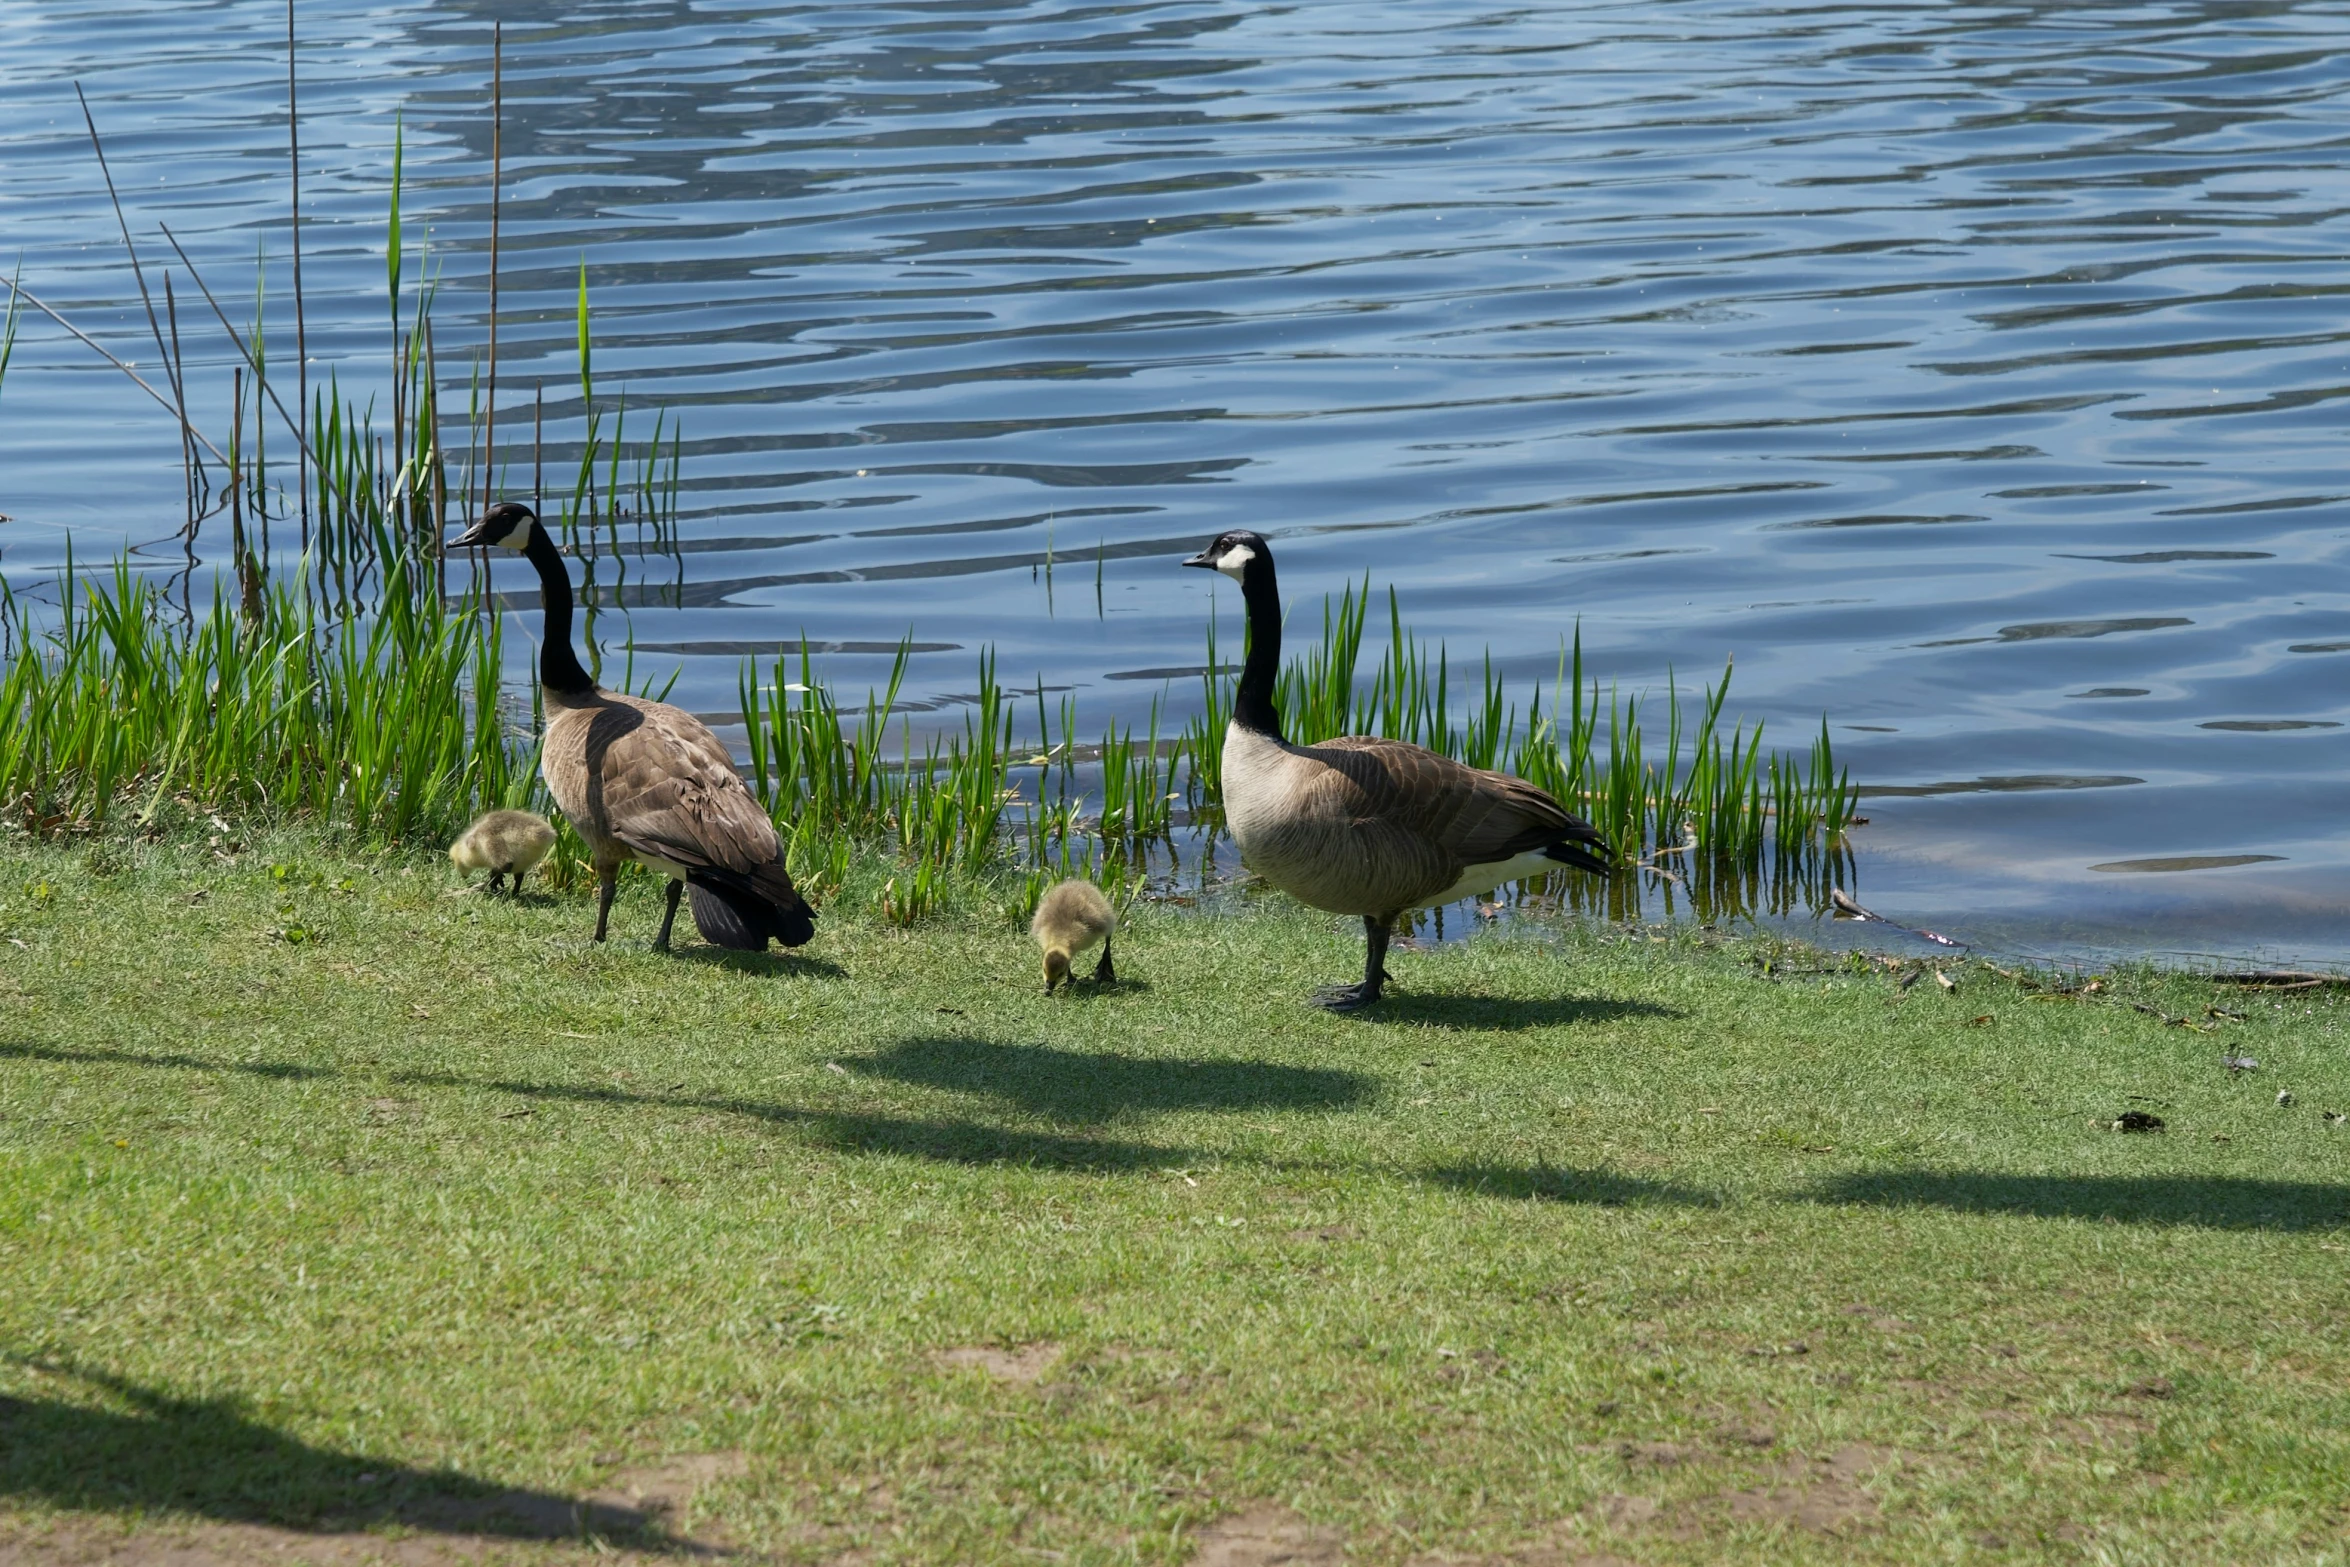 geese are walking through the grass beside the water